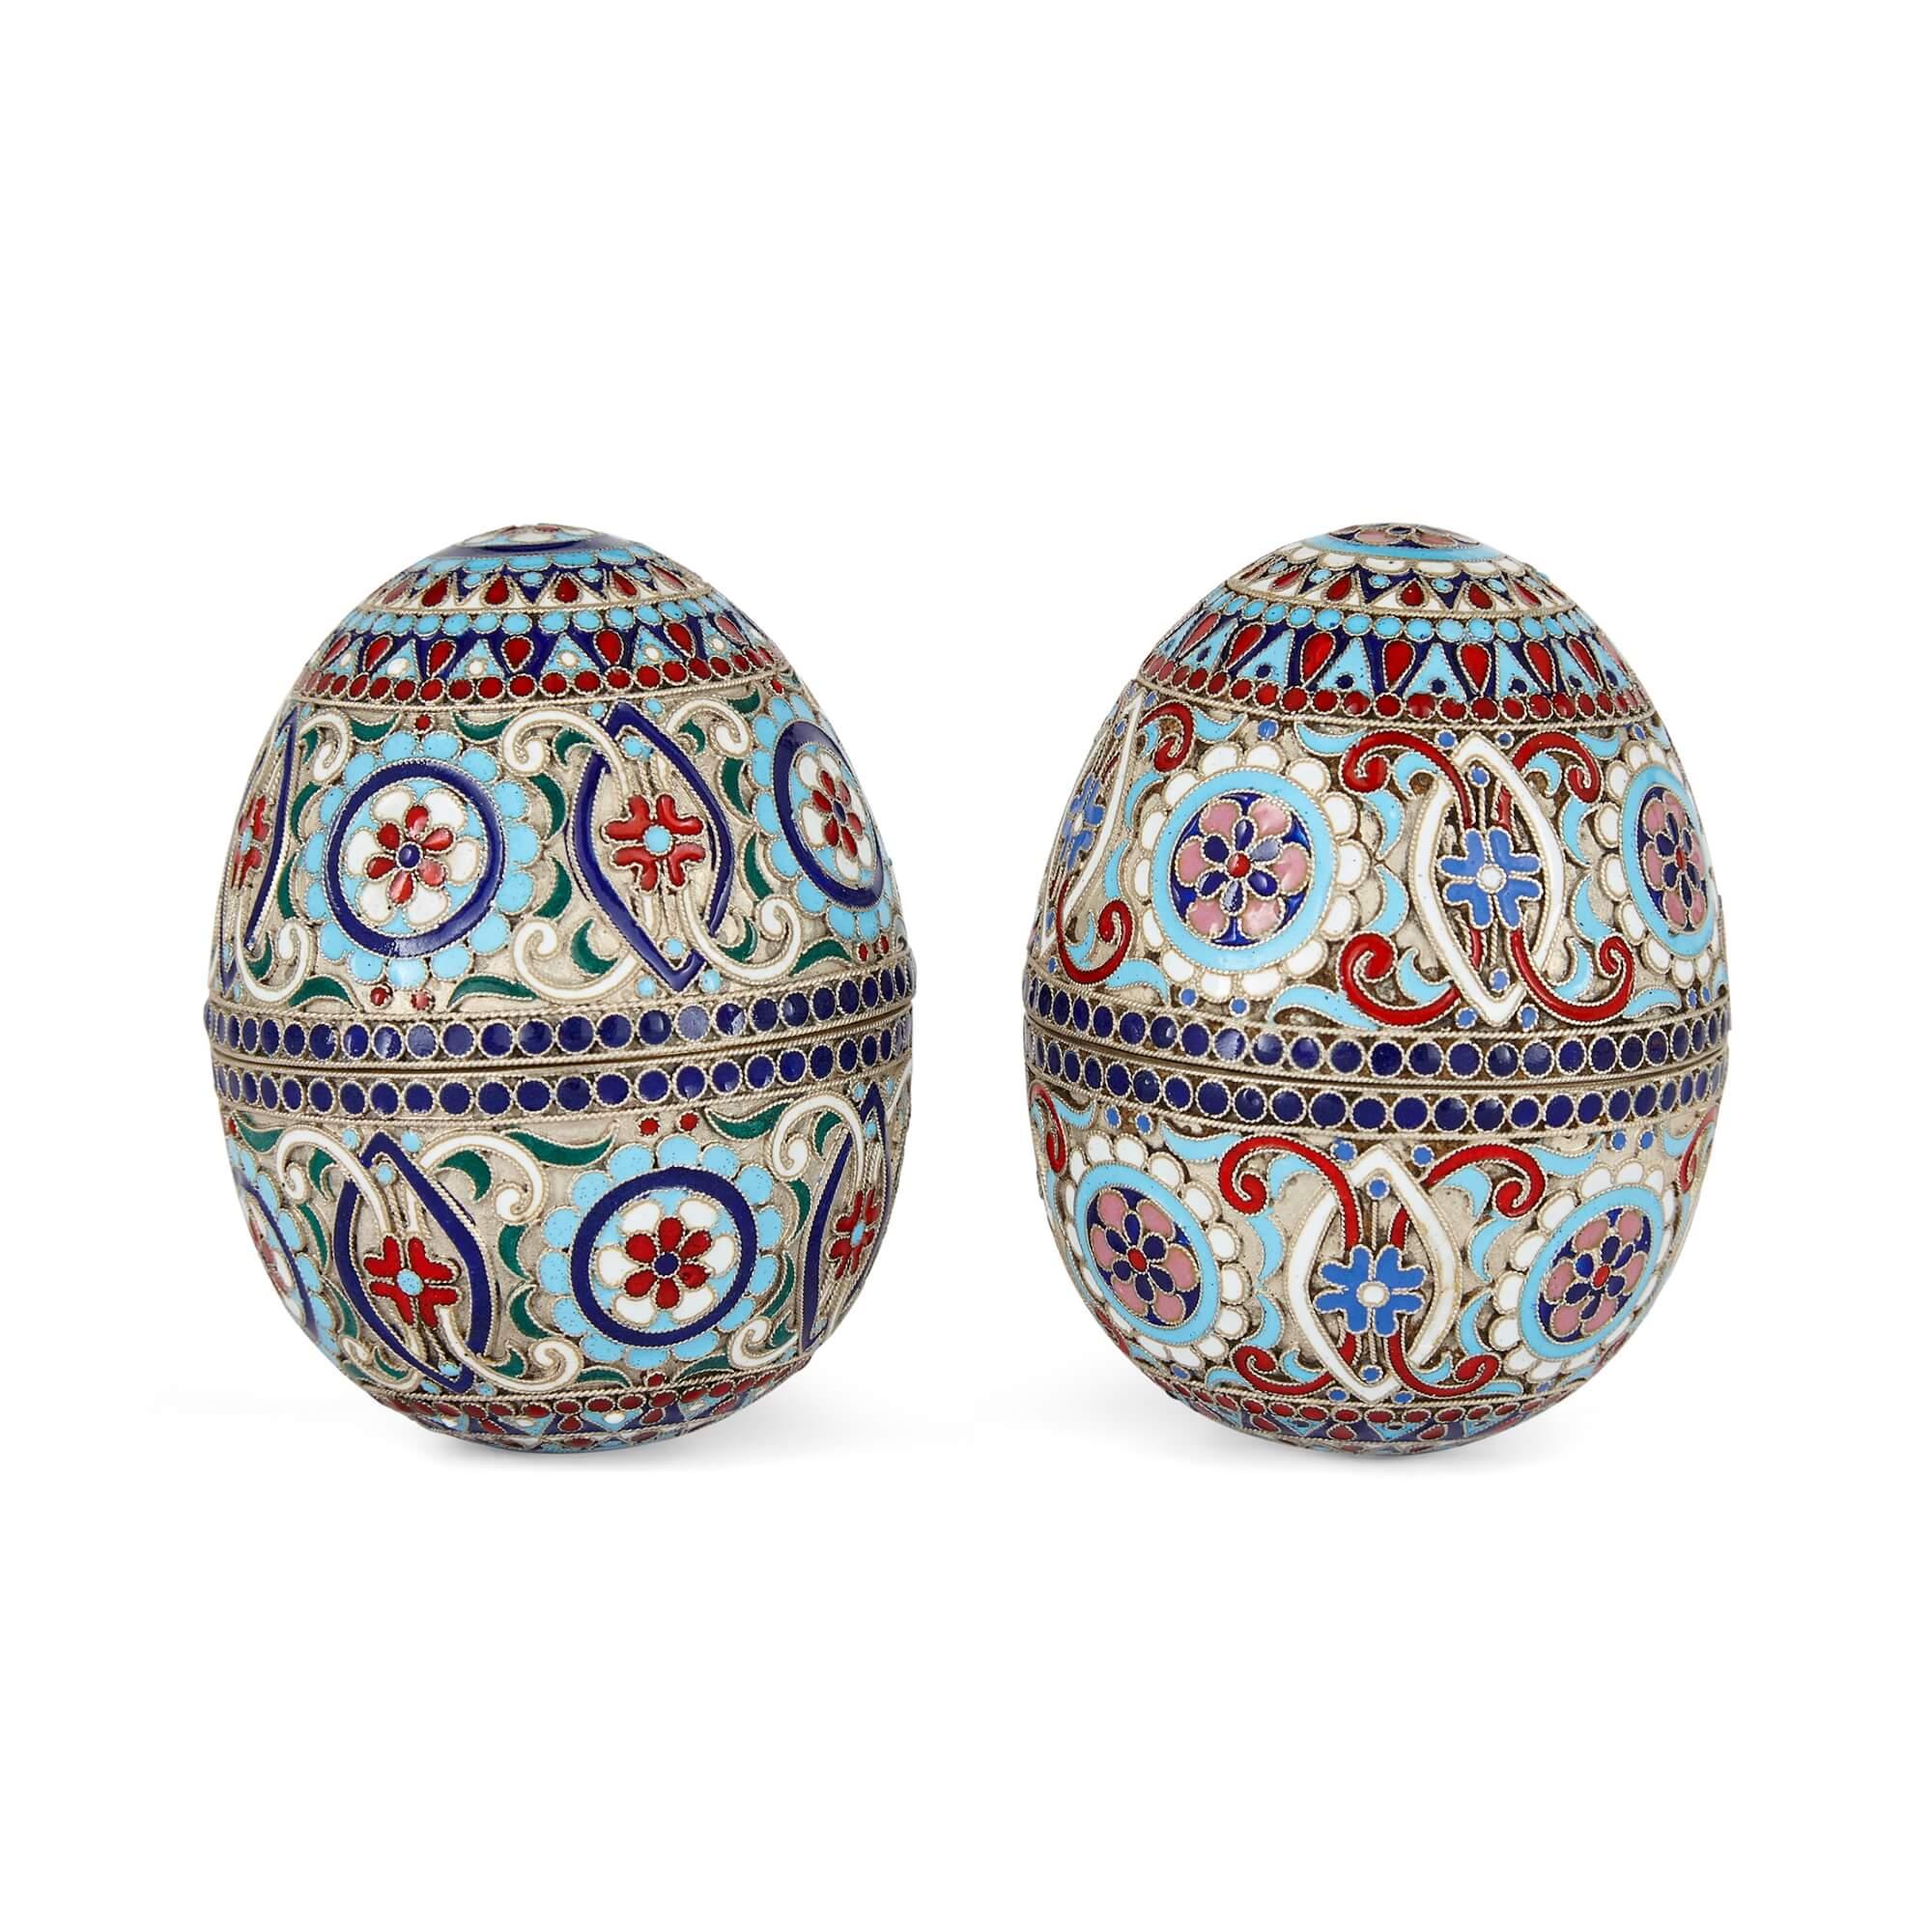 Pair of cloisonné enamel decorated and silver gilt eggs 
Russian, 20th Century 
Height 7cm, diameter 5cm

This duo of Russian antique eggs, artfully hand-fashioned from gilded silver and bedecked with painstakingly rendered cloisonné enamel, serve